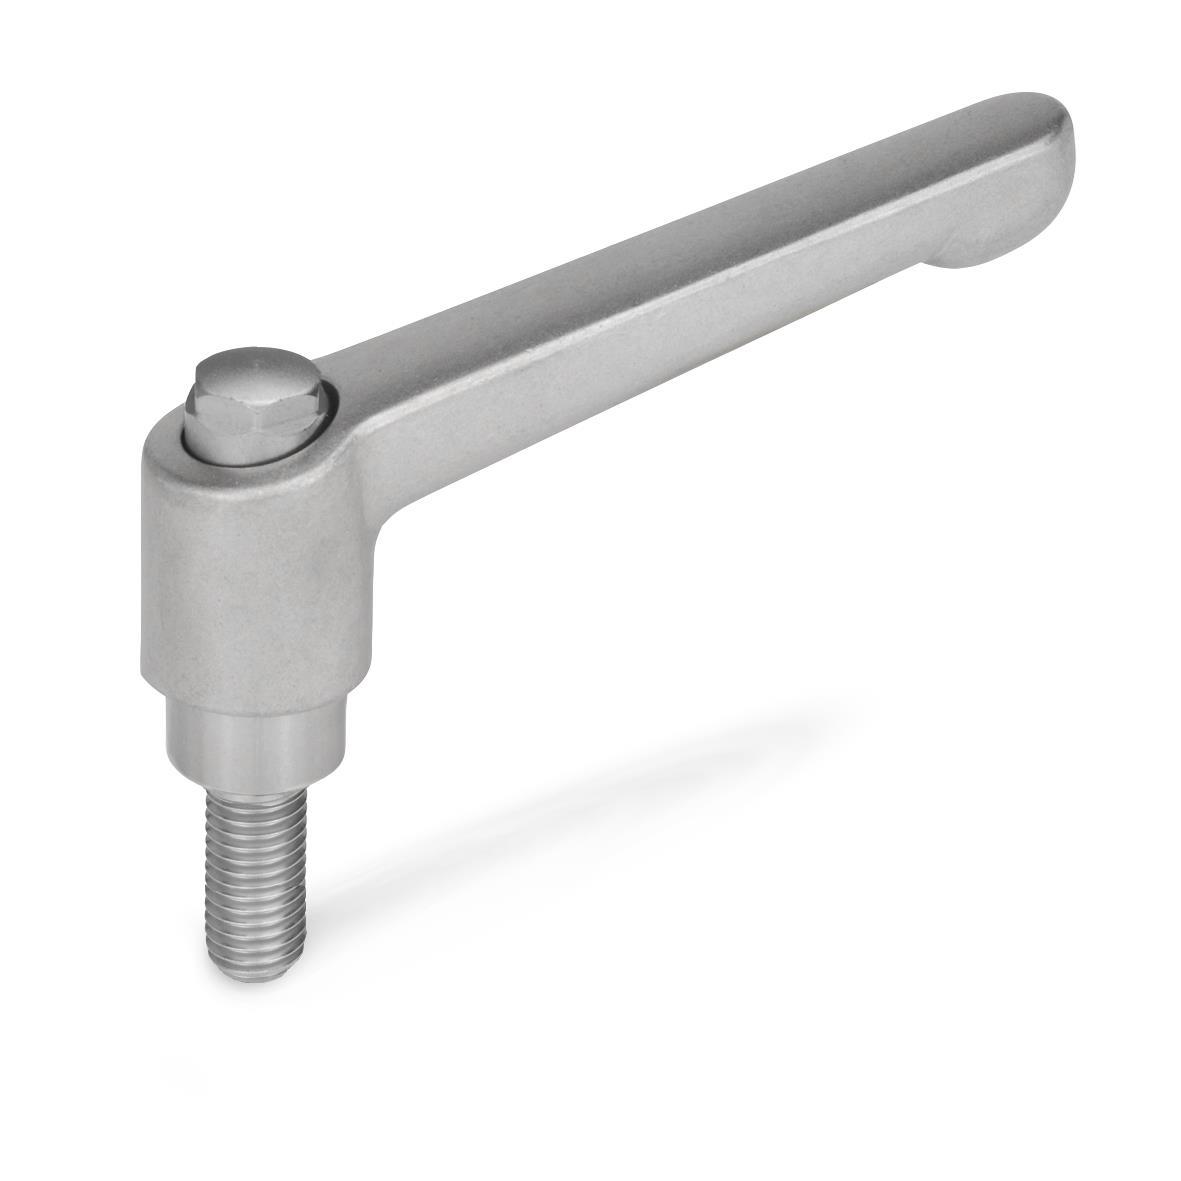 GN 911.3 Adjustable Stainless Steel Hand Levers, with Threaded Stud, for Tube Clamp Connectors / Linear Actuator Connectors 